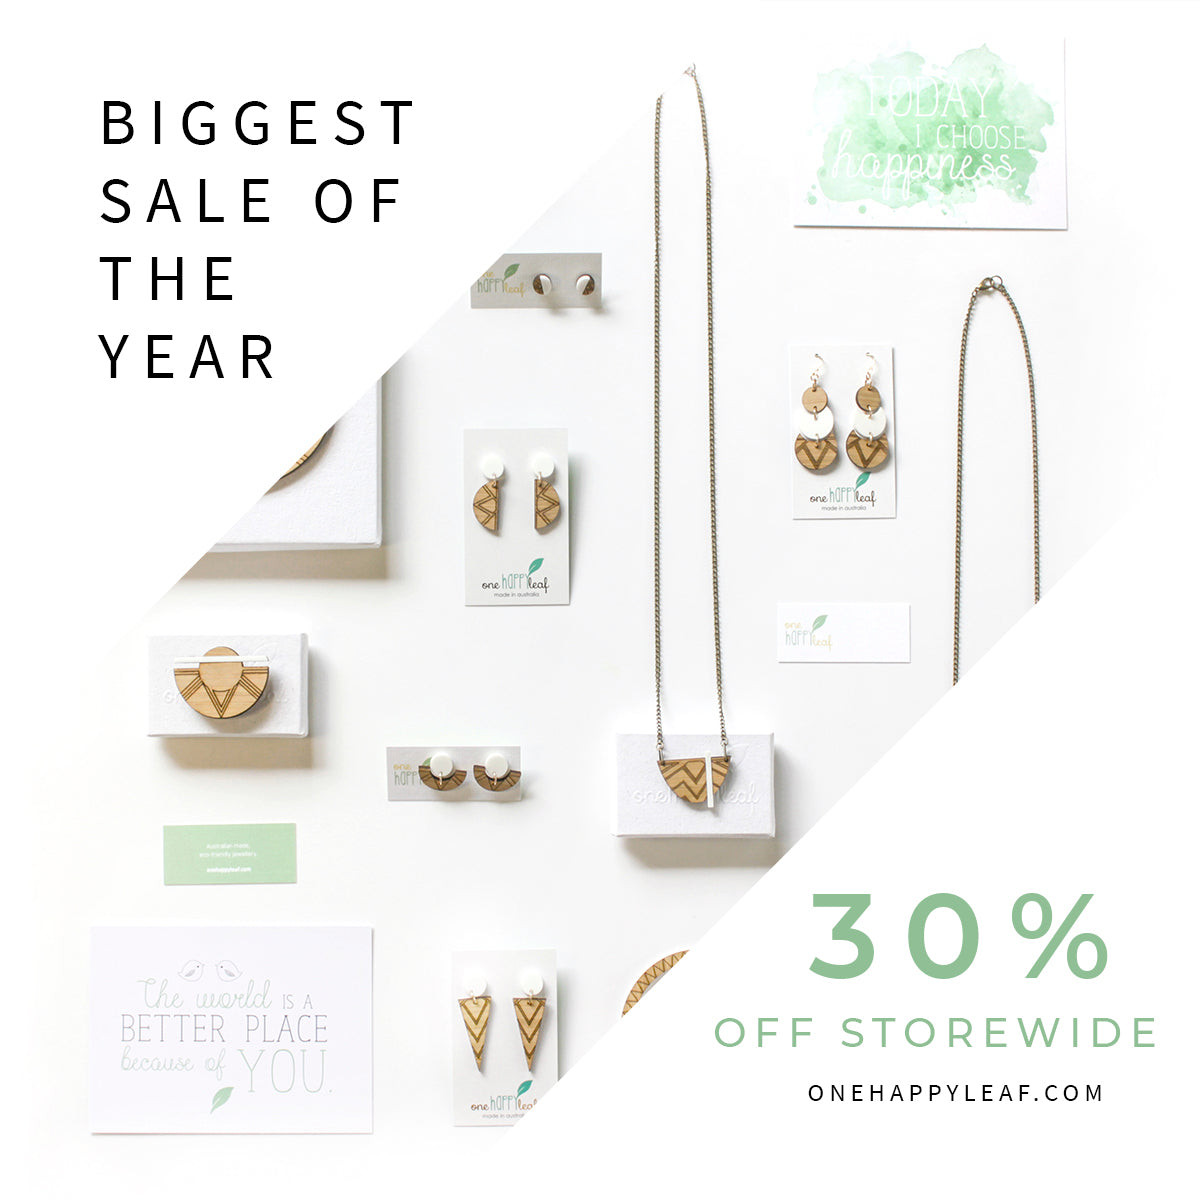 Our biggest sale - 30% off